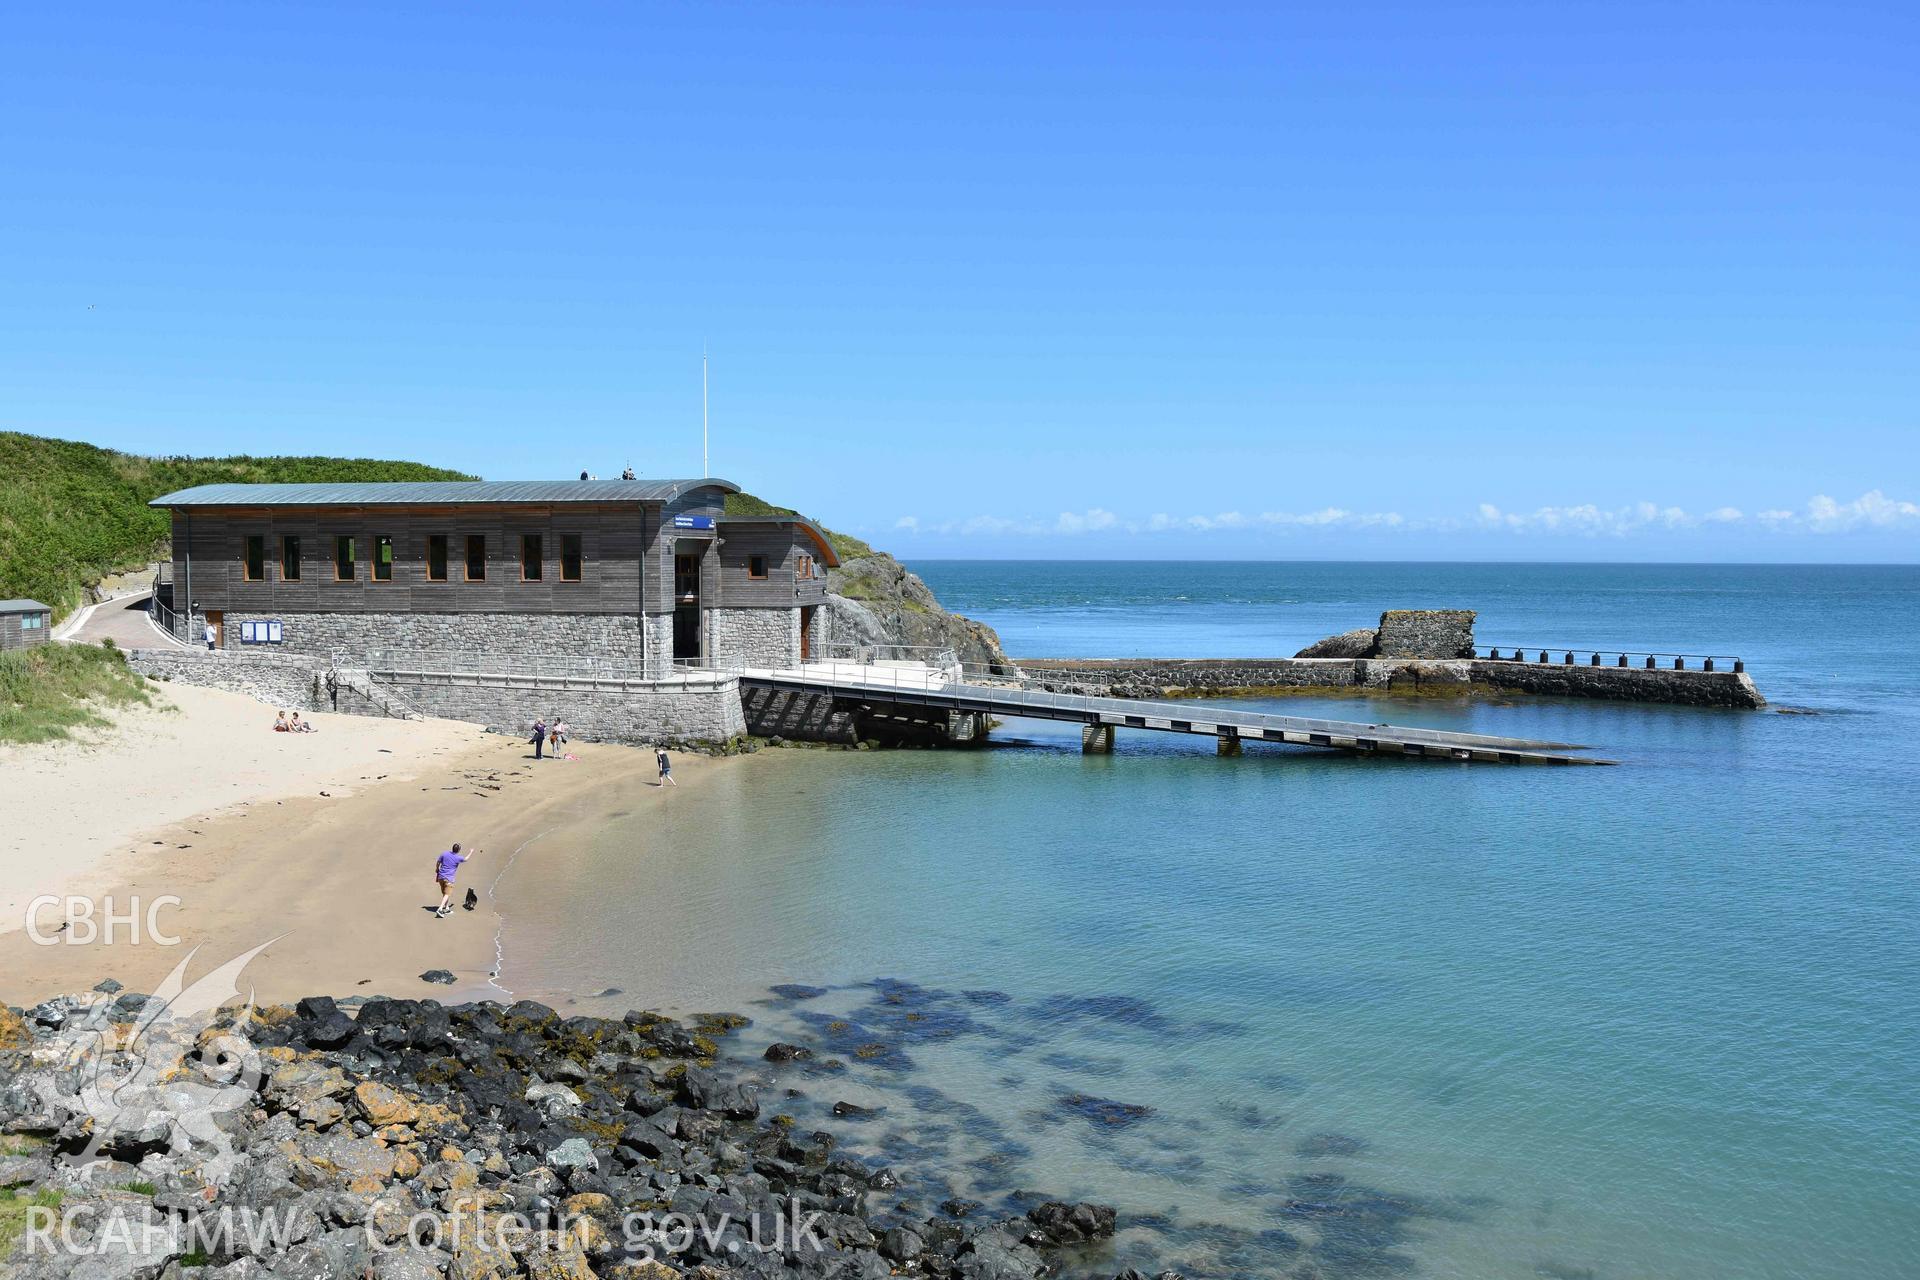 Lifeboat House, Porth Dinllaen. View from the south. Photographed by Louise Barker of RCAHMW, 9th June 2017. Produced with EU funds through the Ireland Wales Co-operation Programme 2014-2023. All material made freely available through the Open Government Licence.